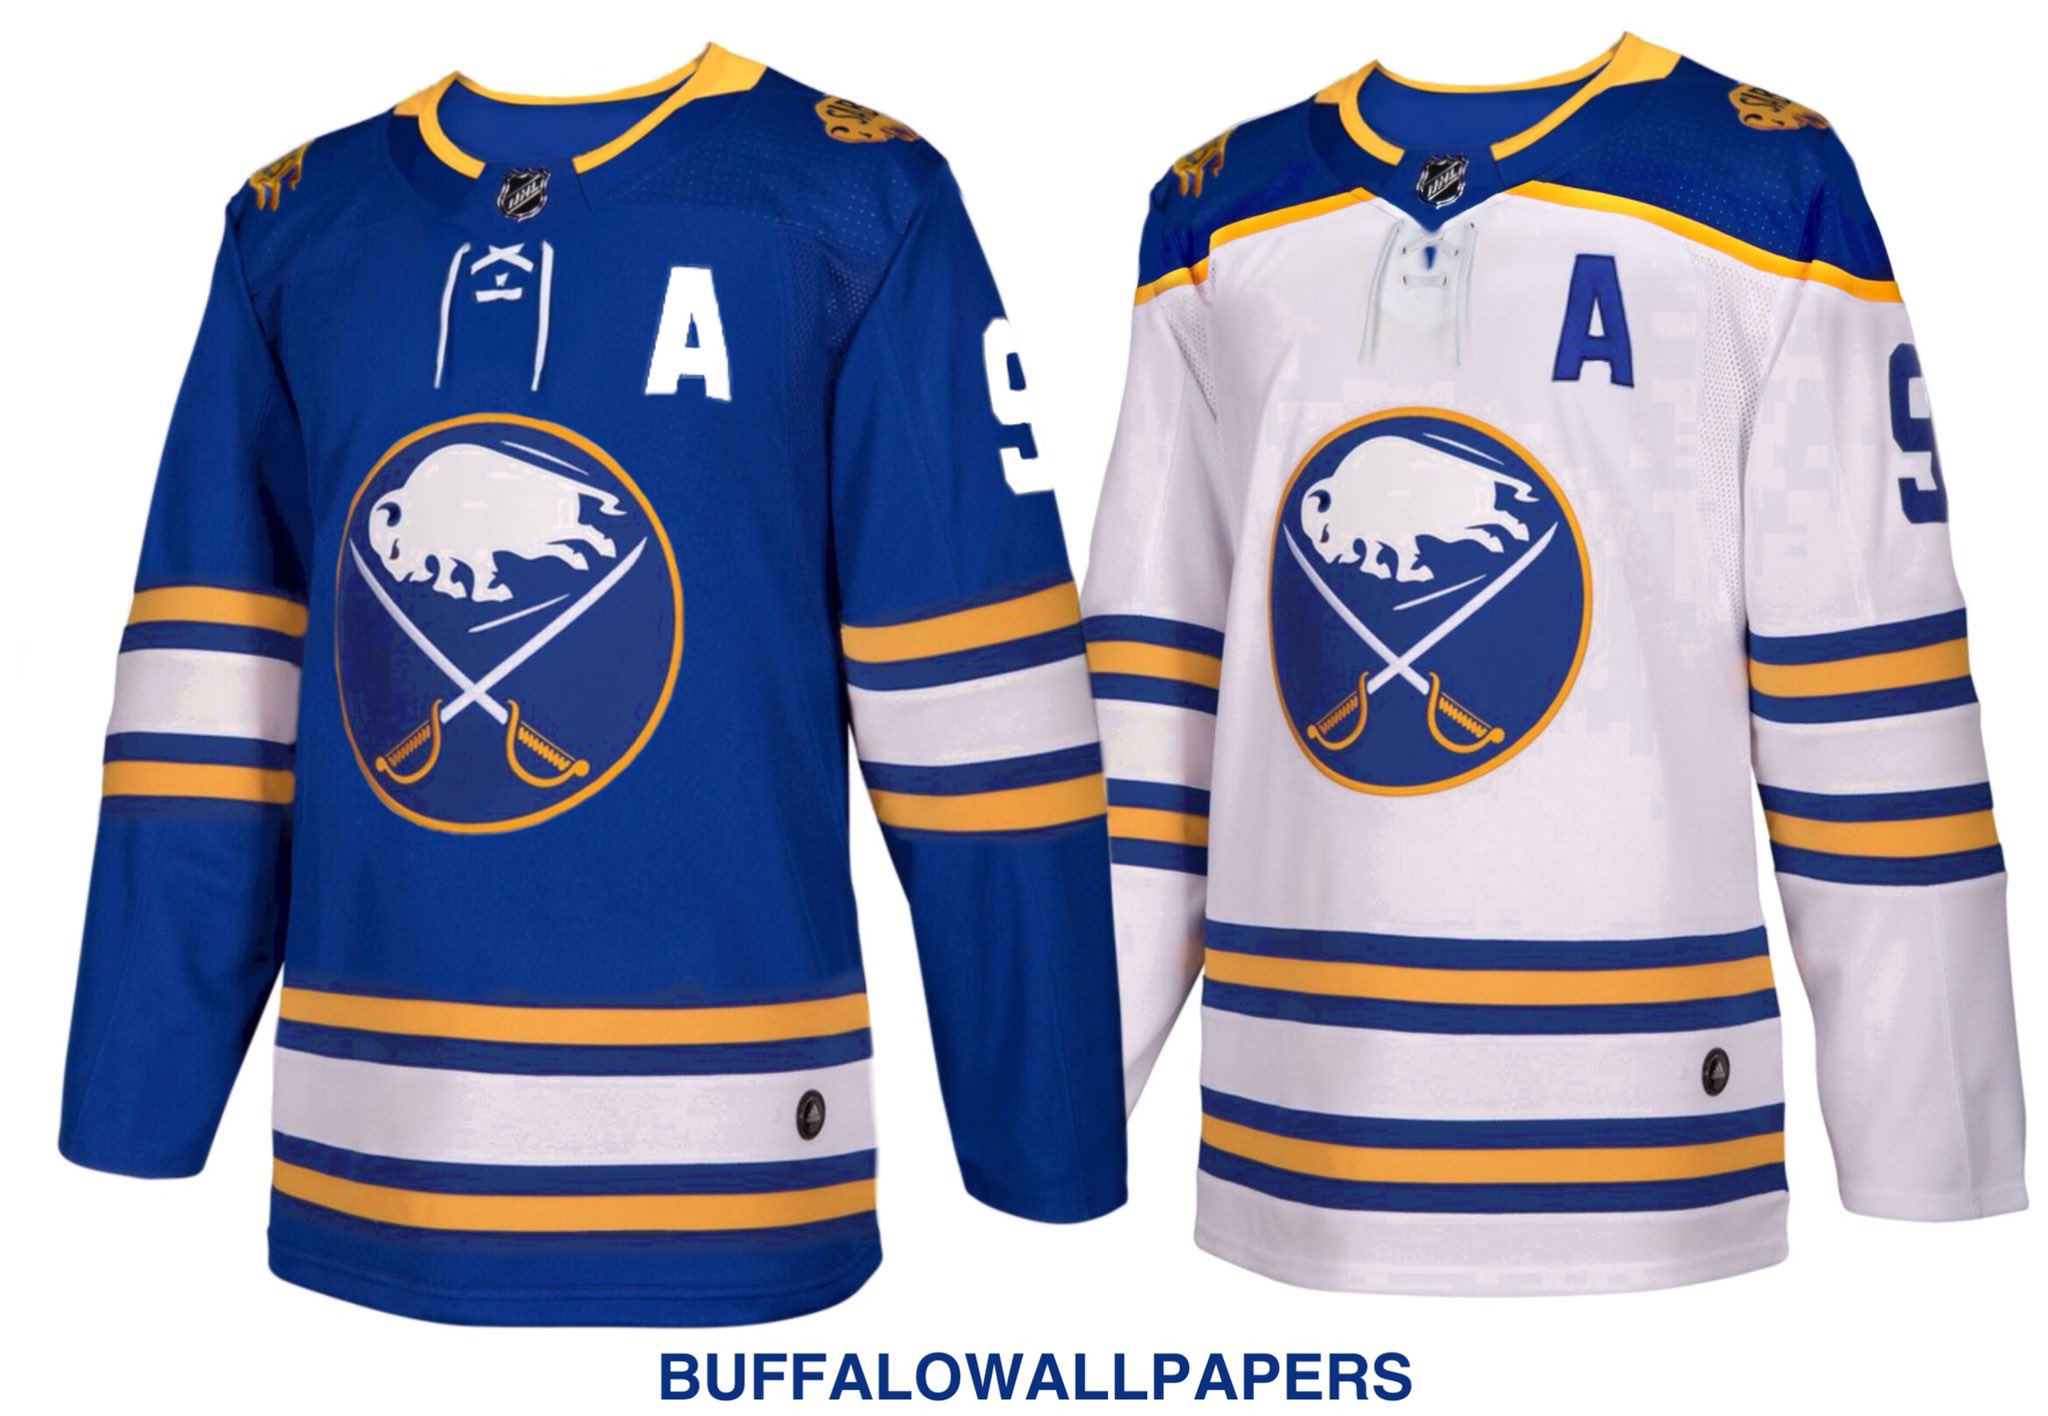 Jordan Santalucia on X: Here's some Buffalo Sabres jersey concepts. This  year will be the return to royal blue & keeping the 50th anniversary  jerseys. With these I was going for what